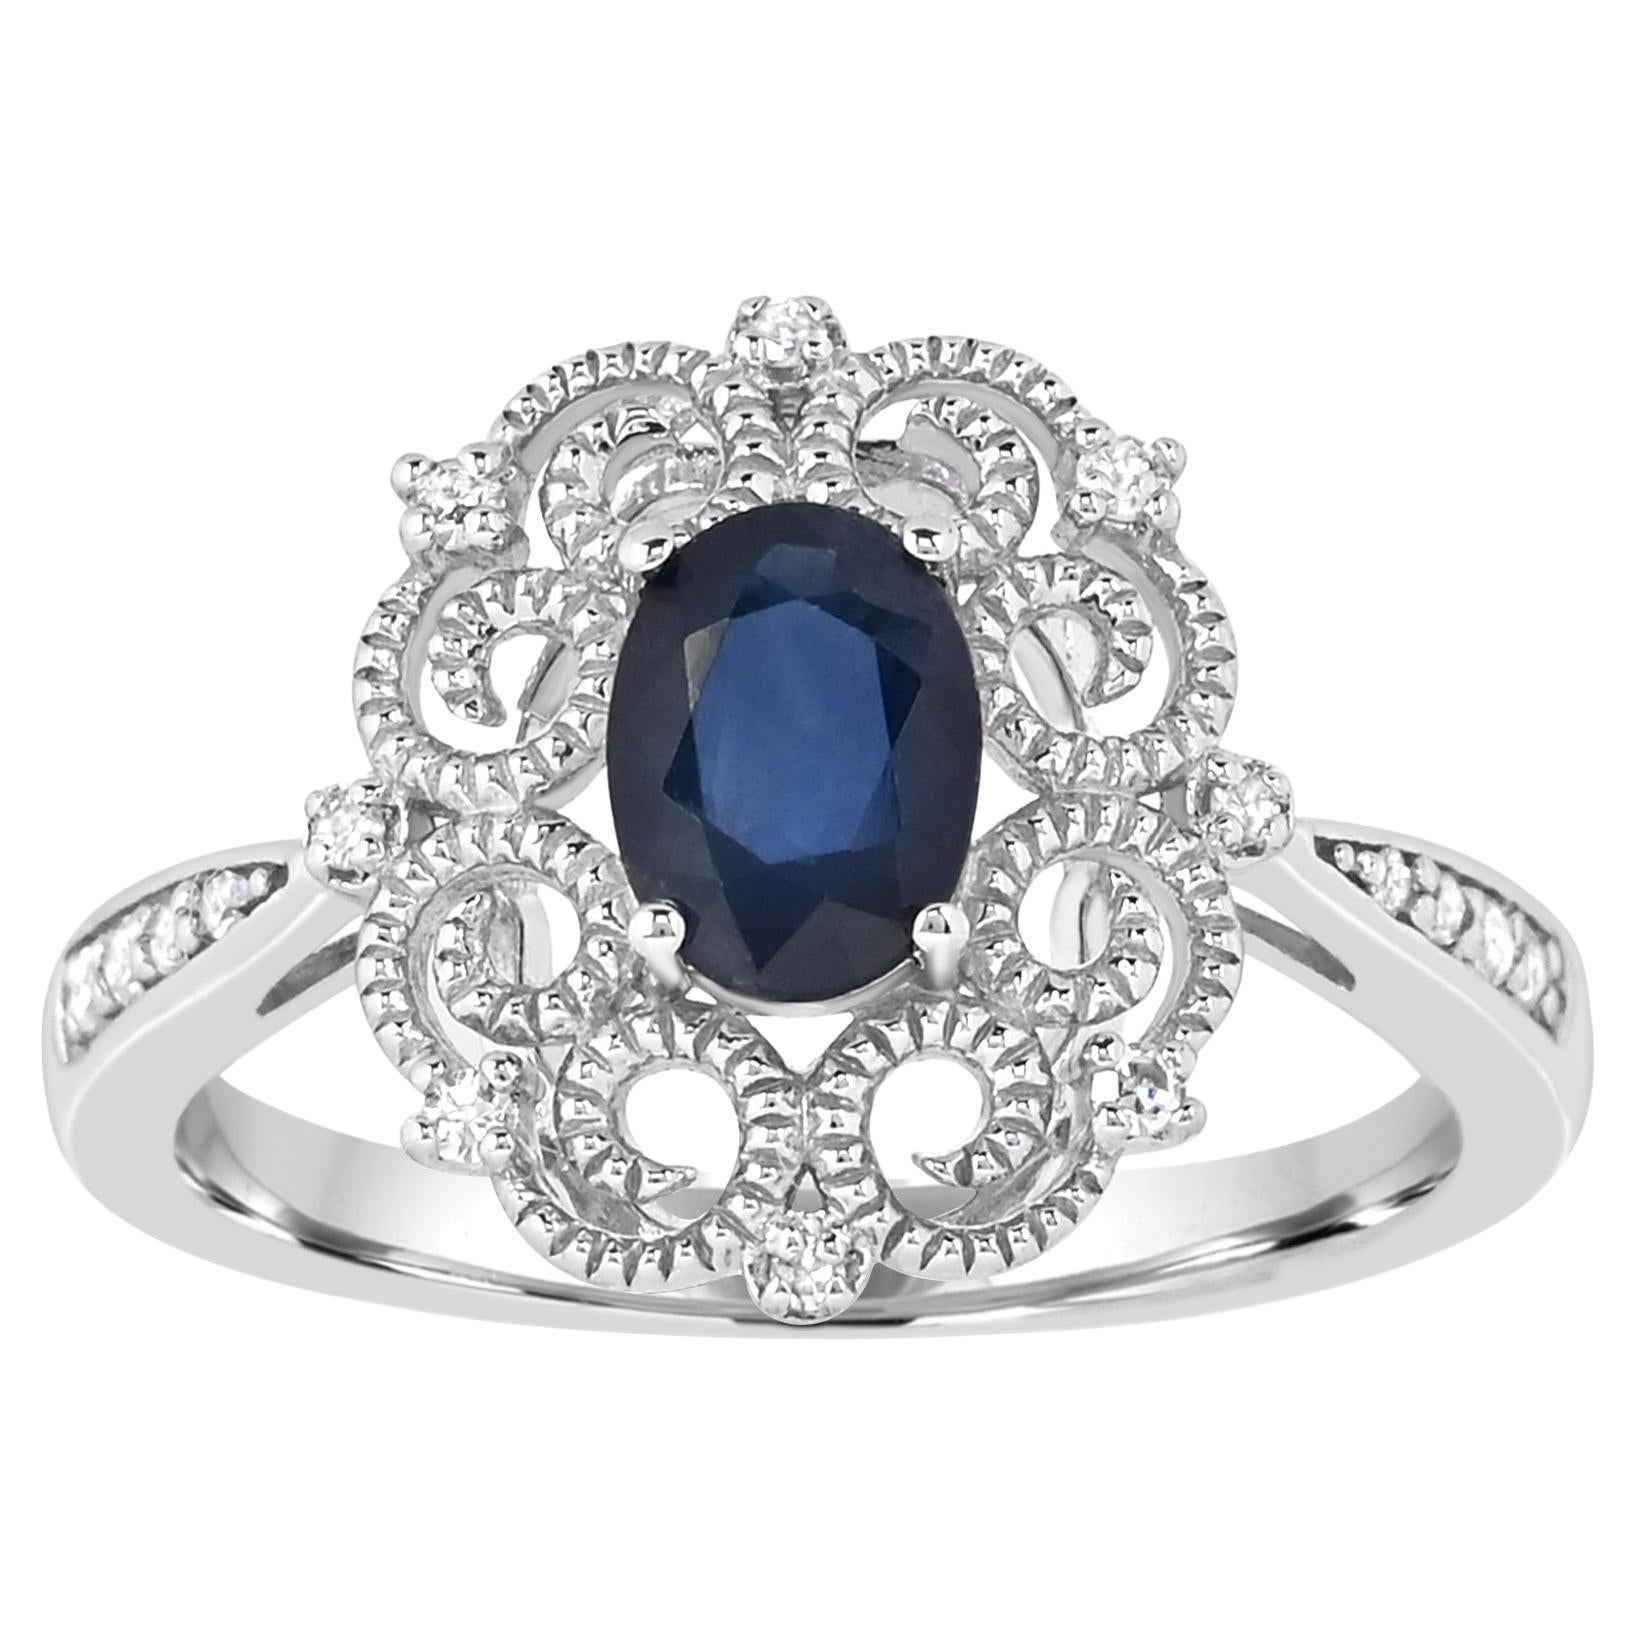 1-1/10 ct. Oval-Cut Blue Sapphire and Diamond Accent Sterling Silver Ring